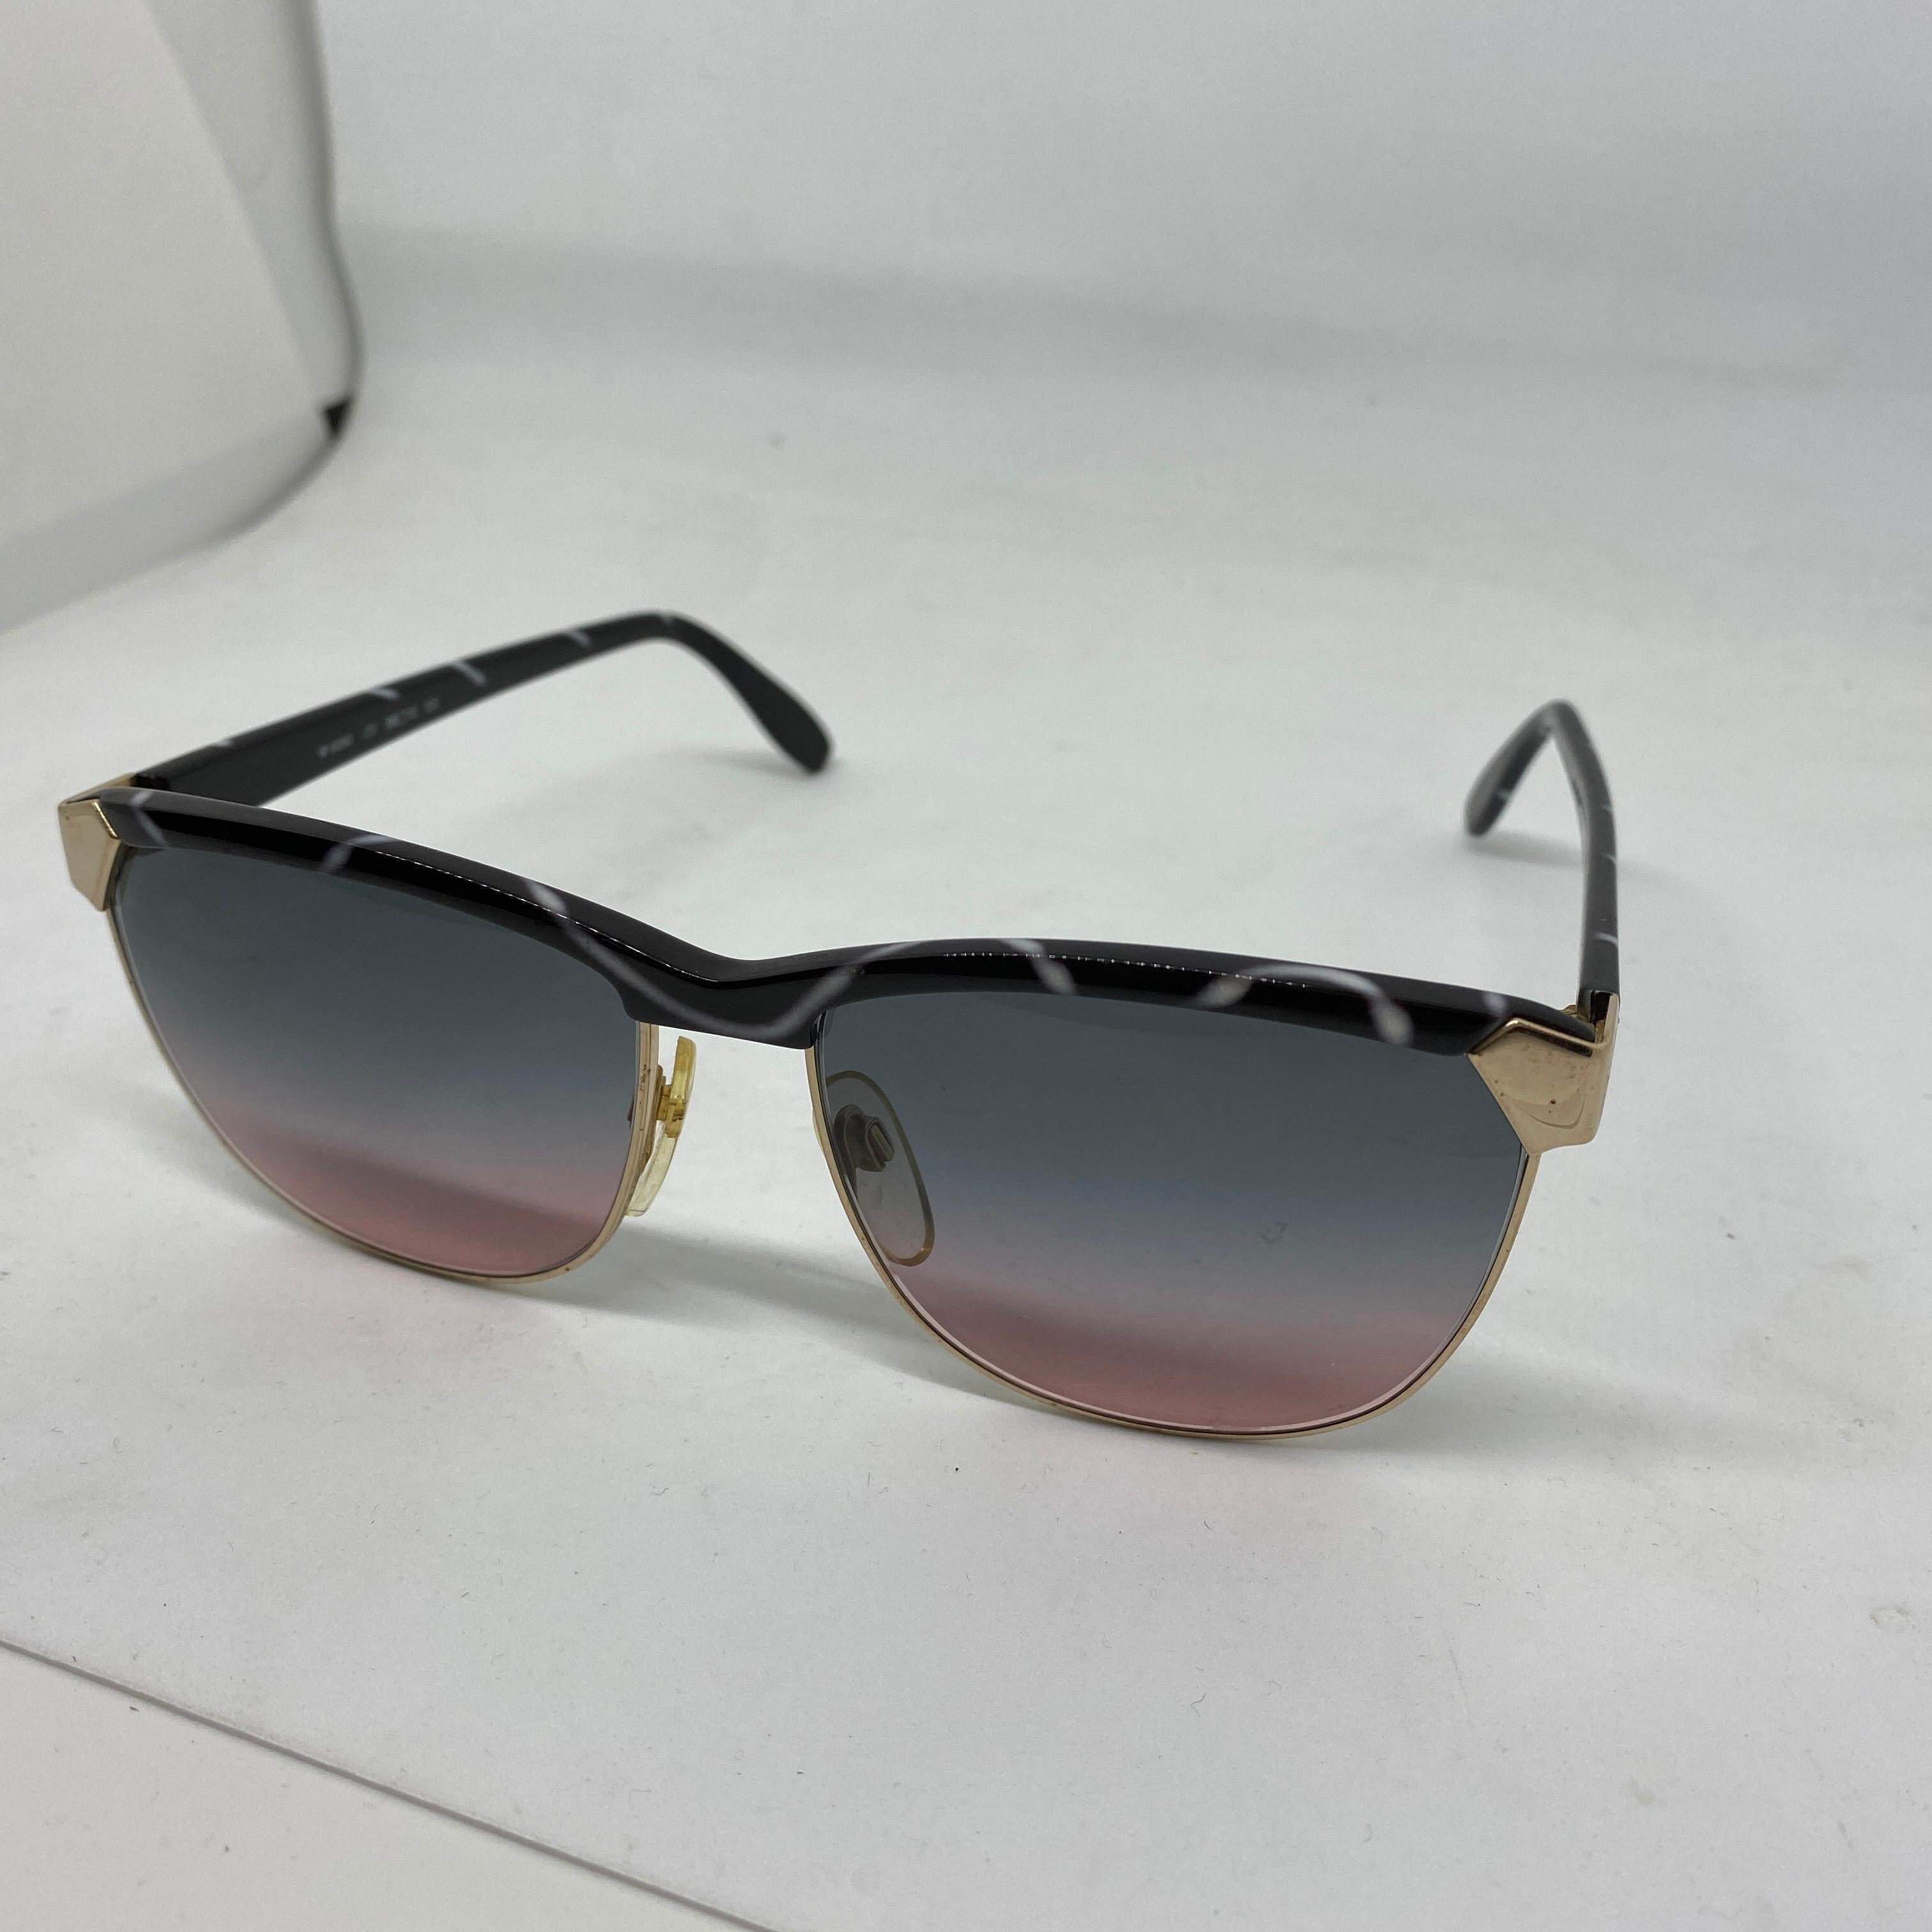 Black and white Italian sunglasses with gilded finishes in very good conditions